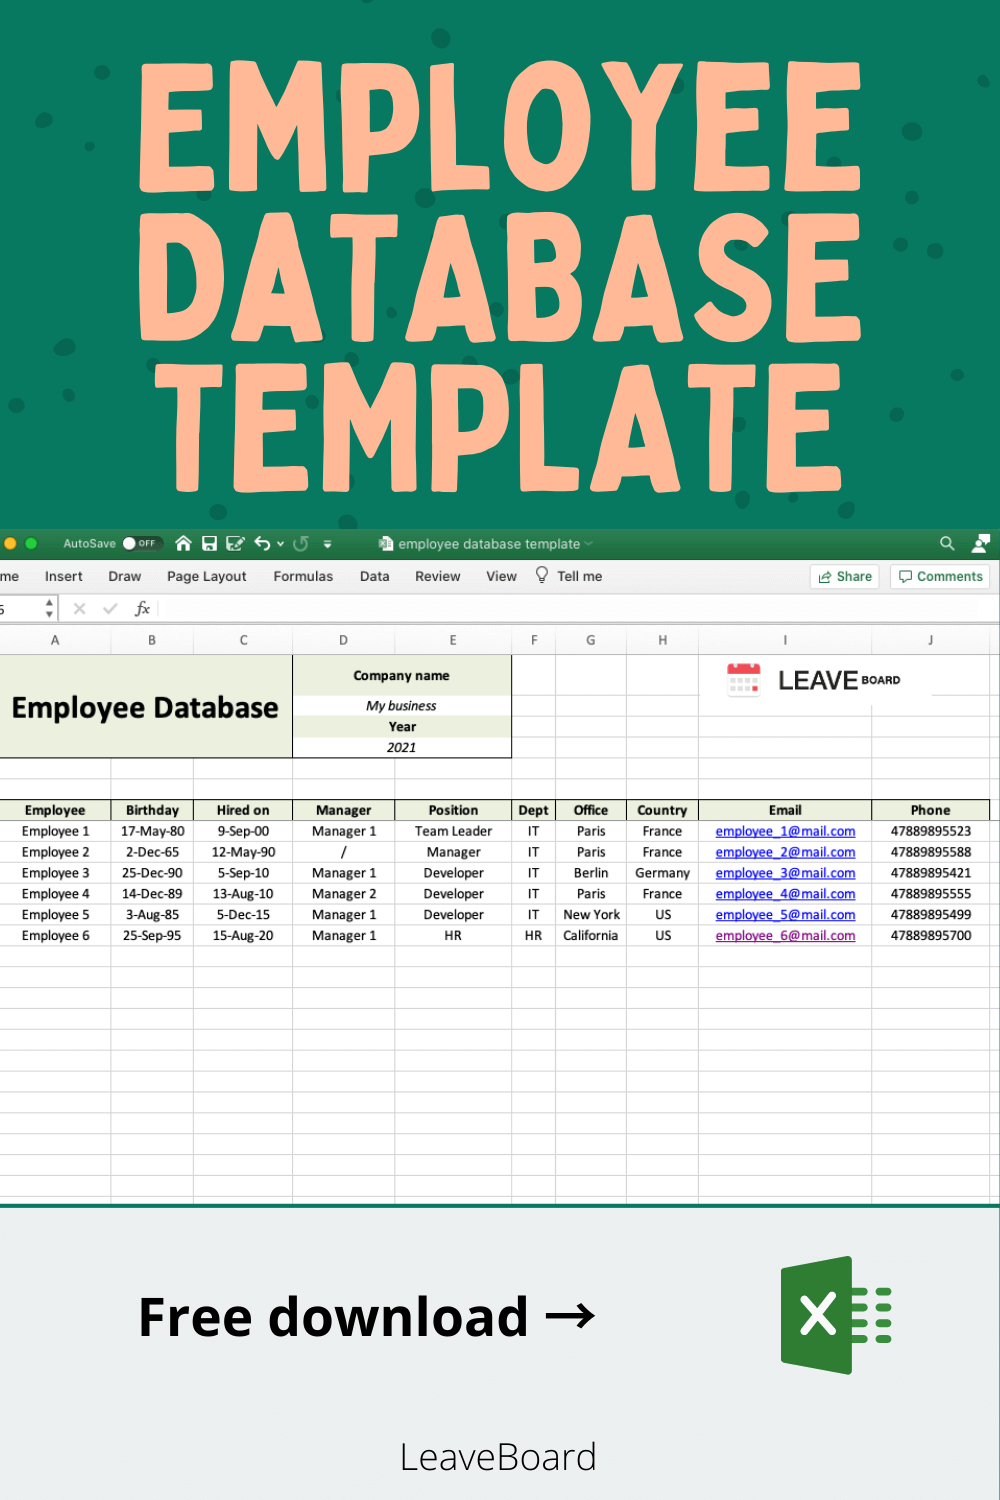 Free Excel Database Templates Of Employee Database Te - vrogue.co